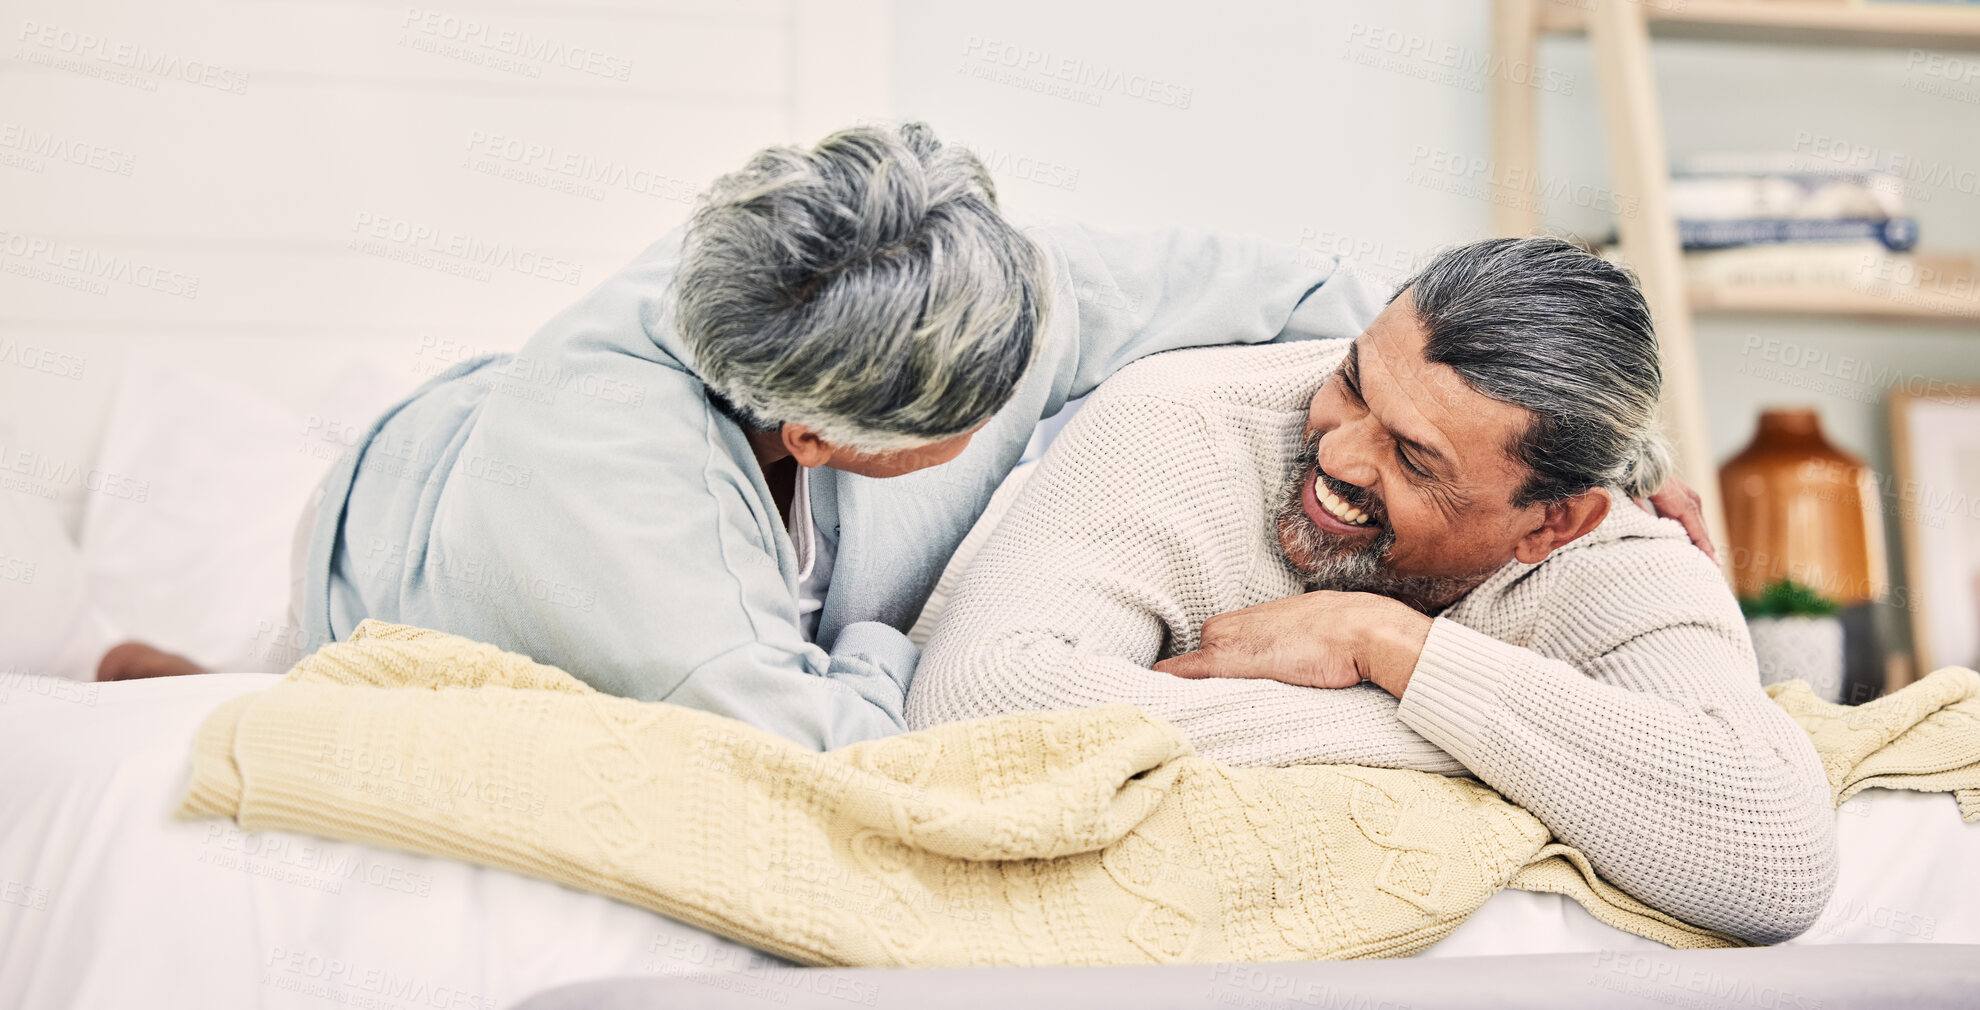 Buy stock photo Lying, funny or old couple in bedroom to relax, enjoy romance or morning time together at home. Hugging, silly senior woman or happy elderly man laughing or bonding with love or smile in retirement